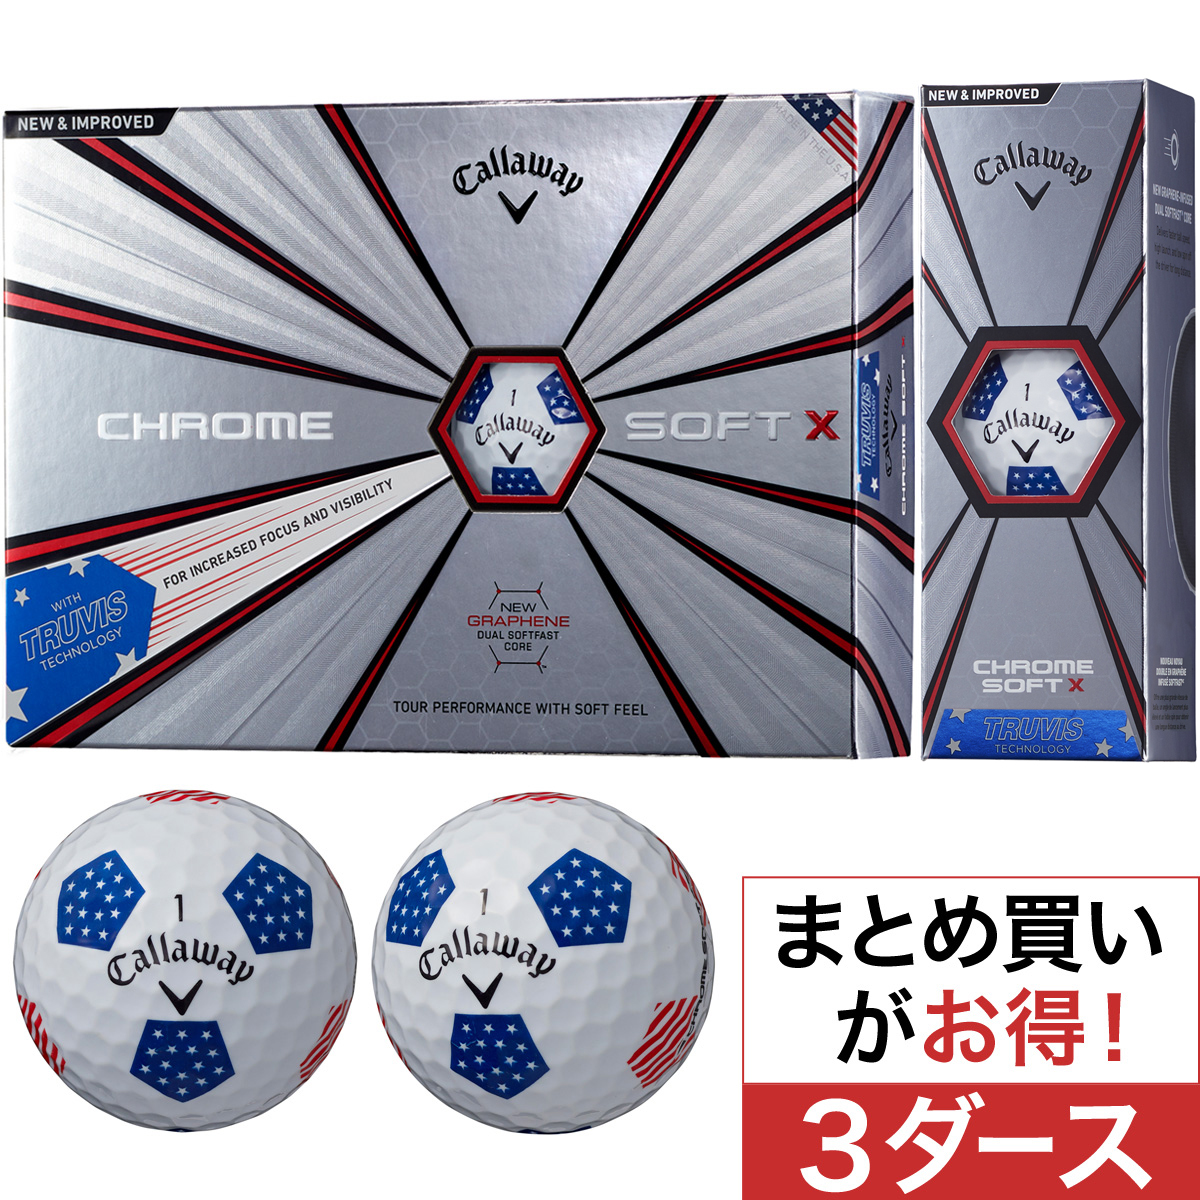  CHROME SOFT X 18 TRUVIS ボール 3ダースセット 